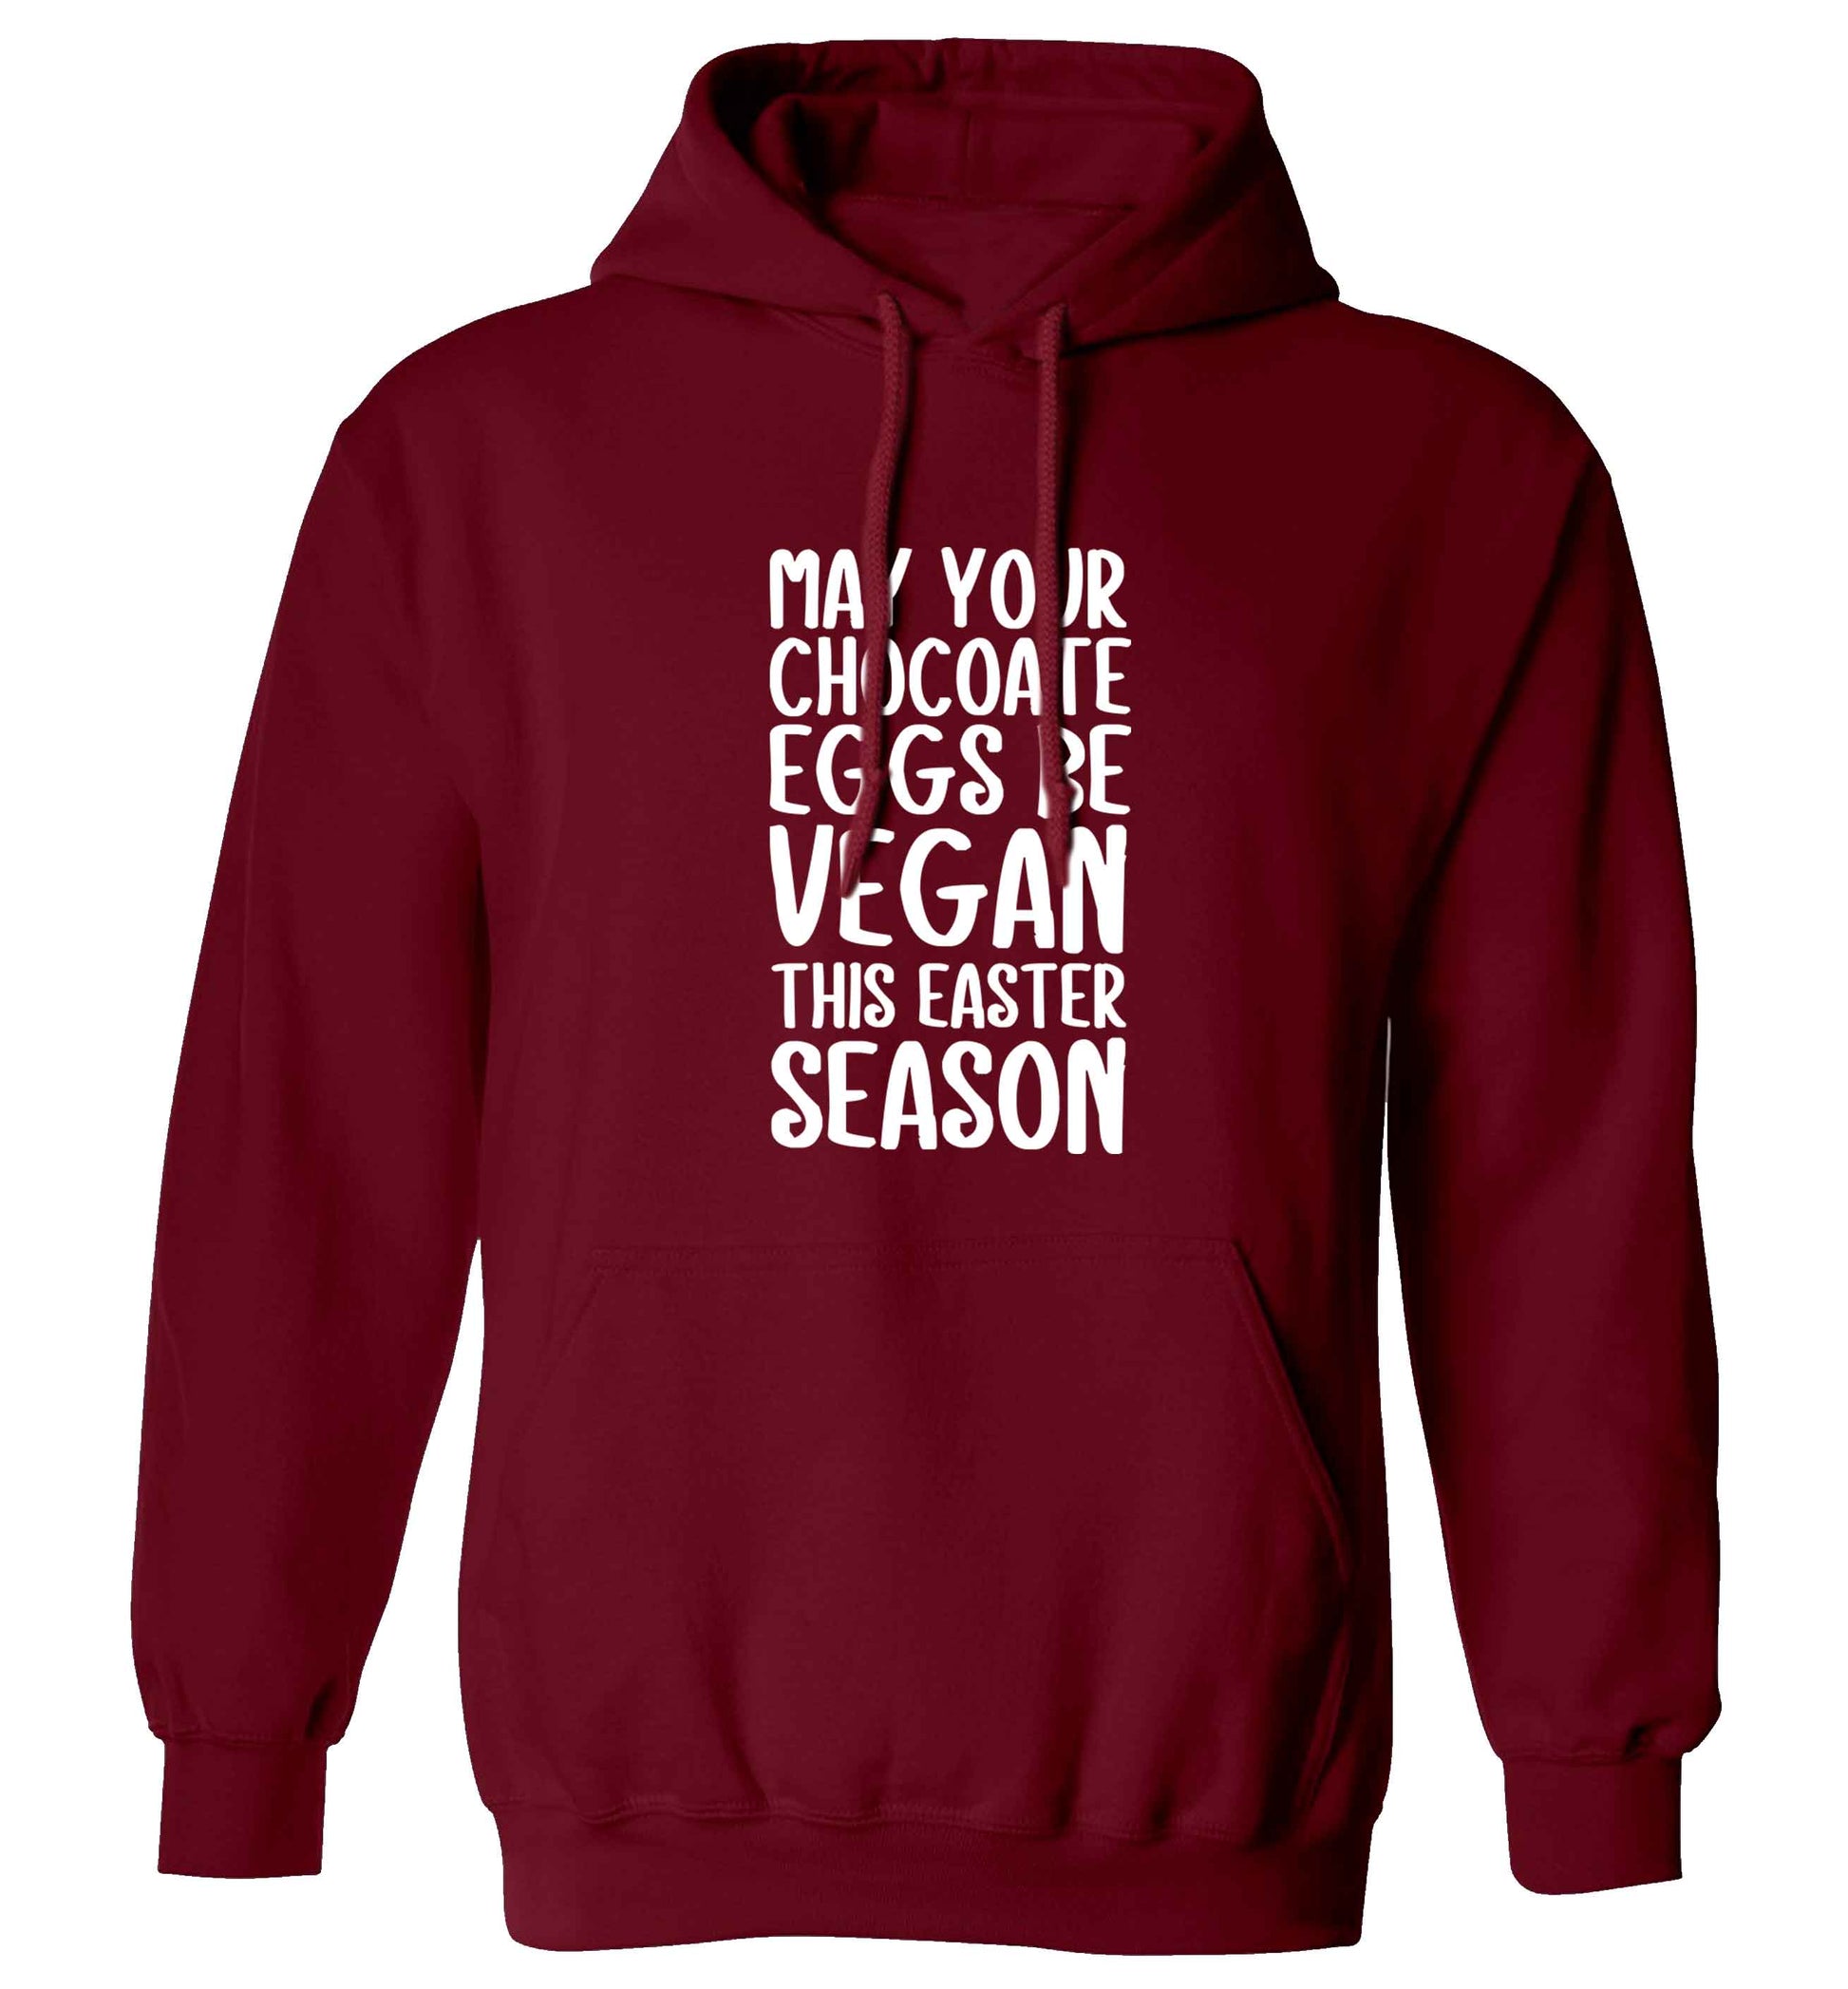 Easter bunny approved! Vegans will love this easter themed adults unisex maroon hoodie 2XL